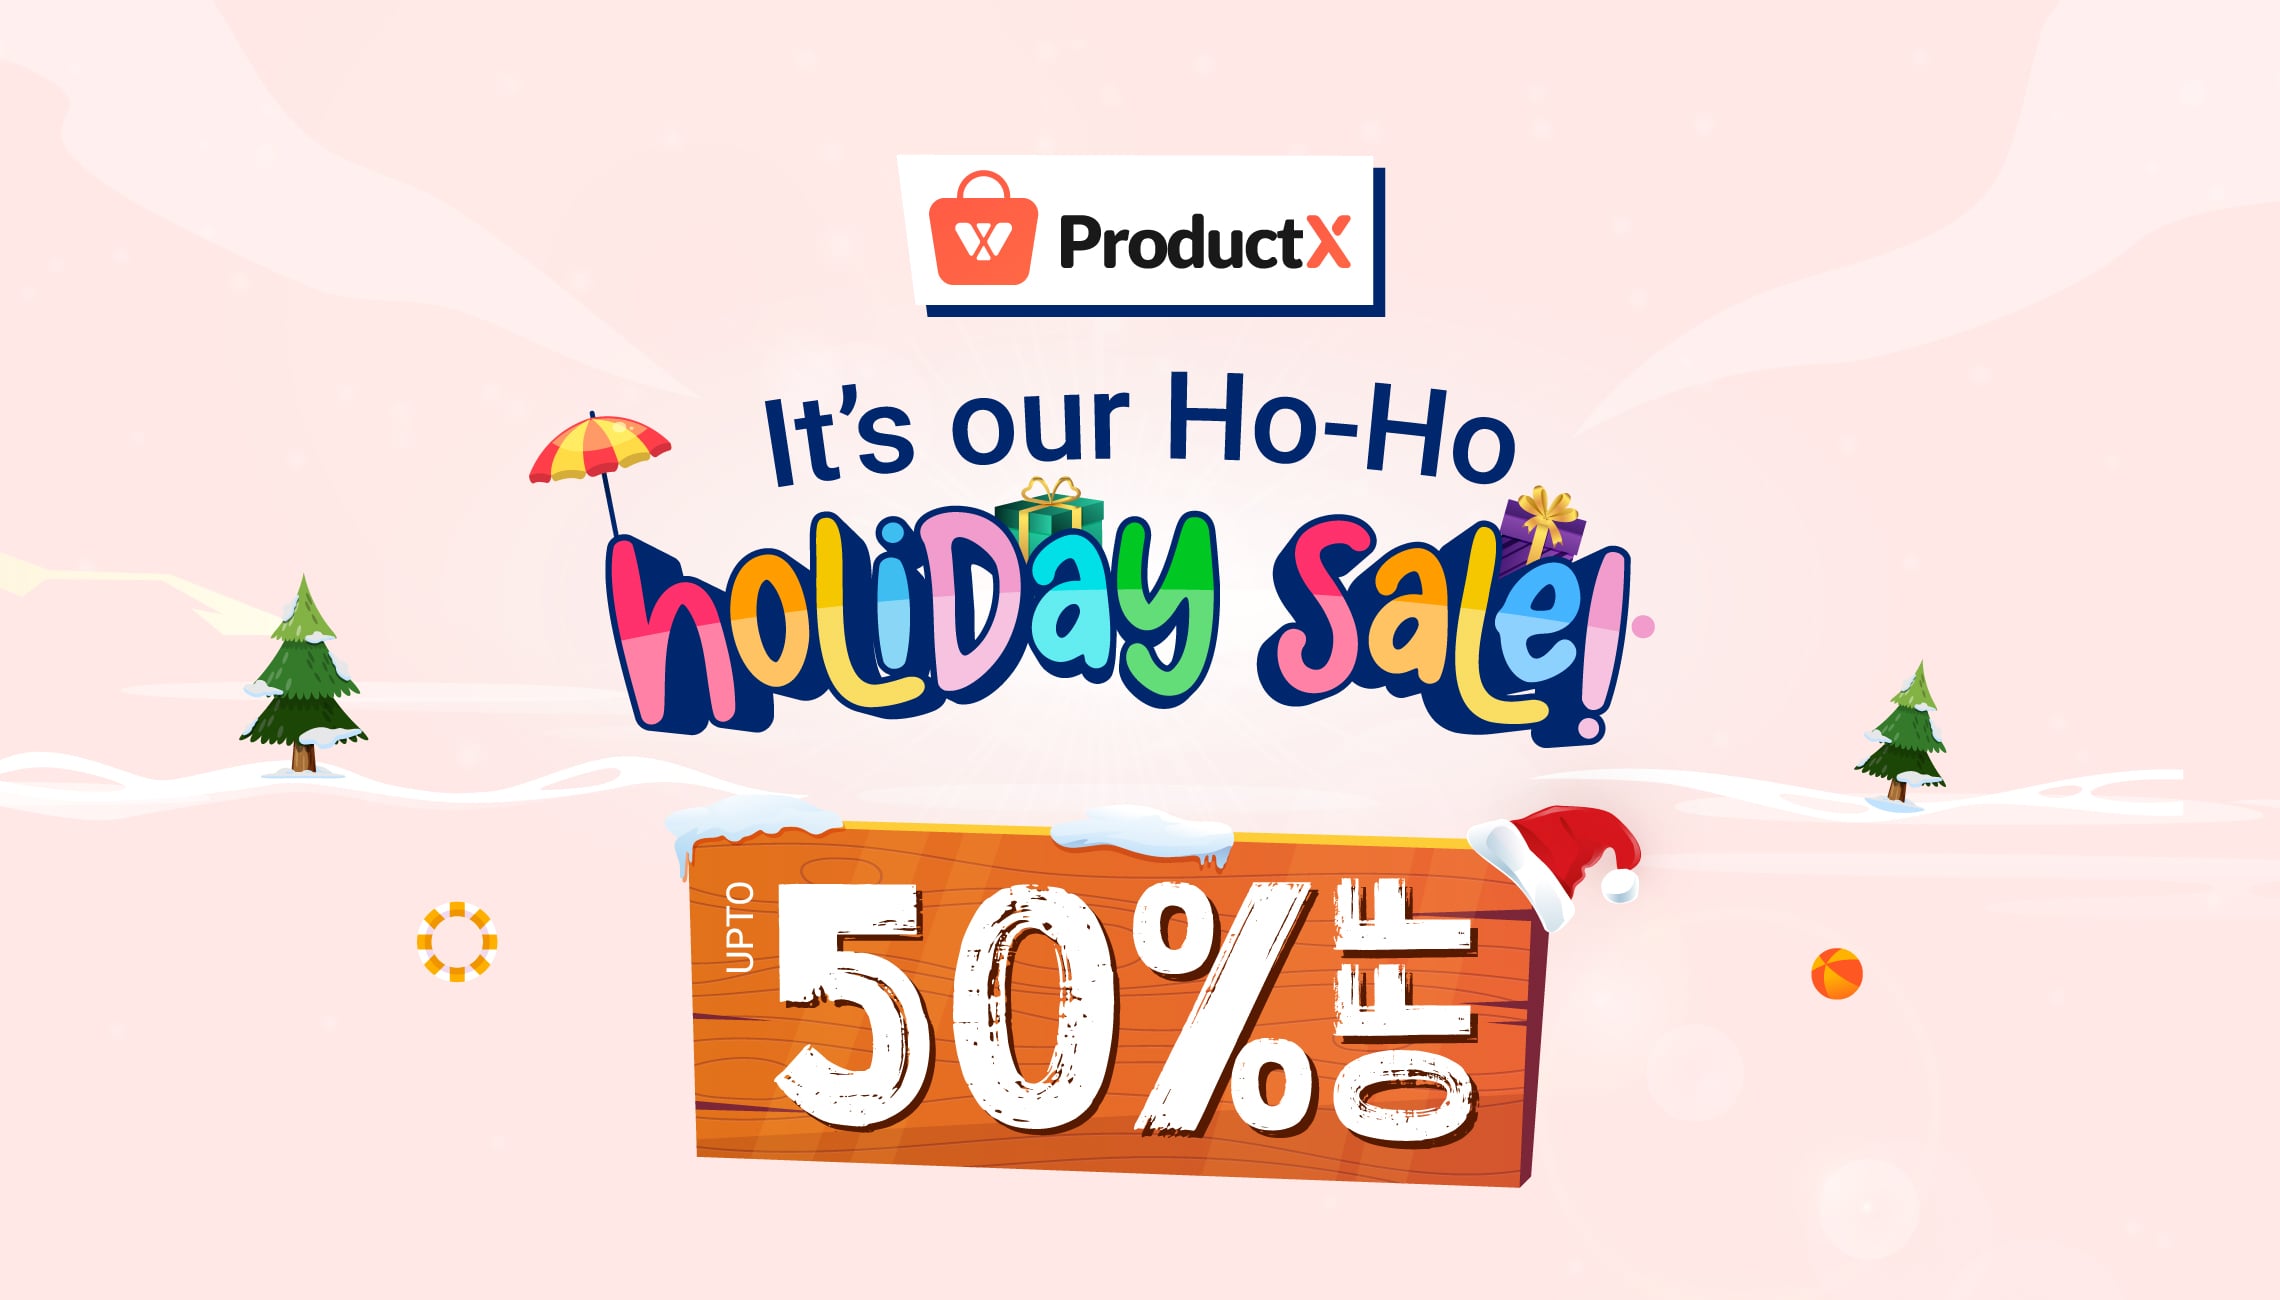 productx holiday sale